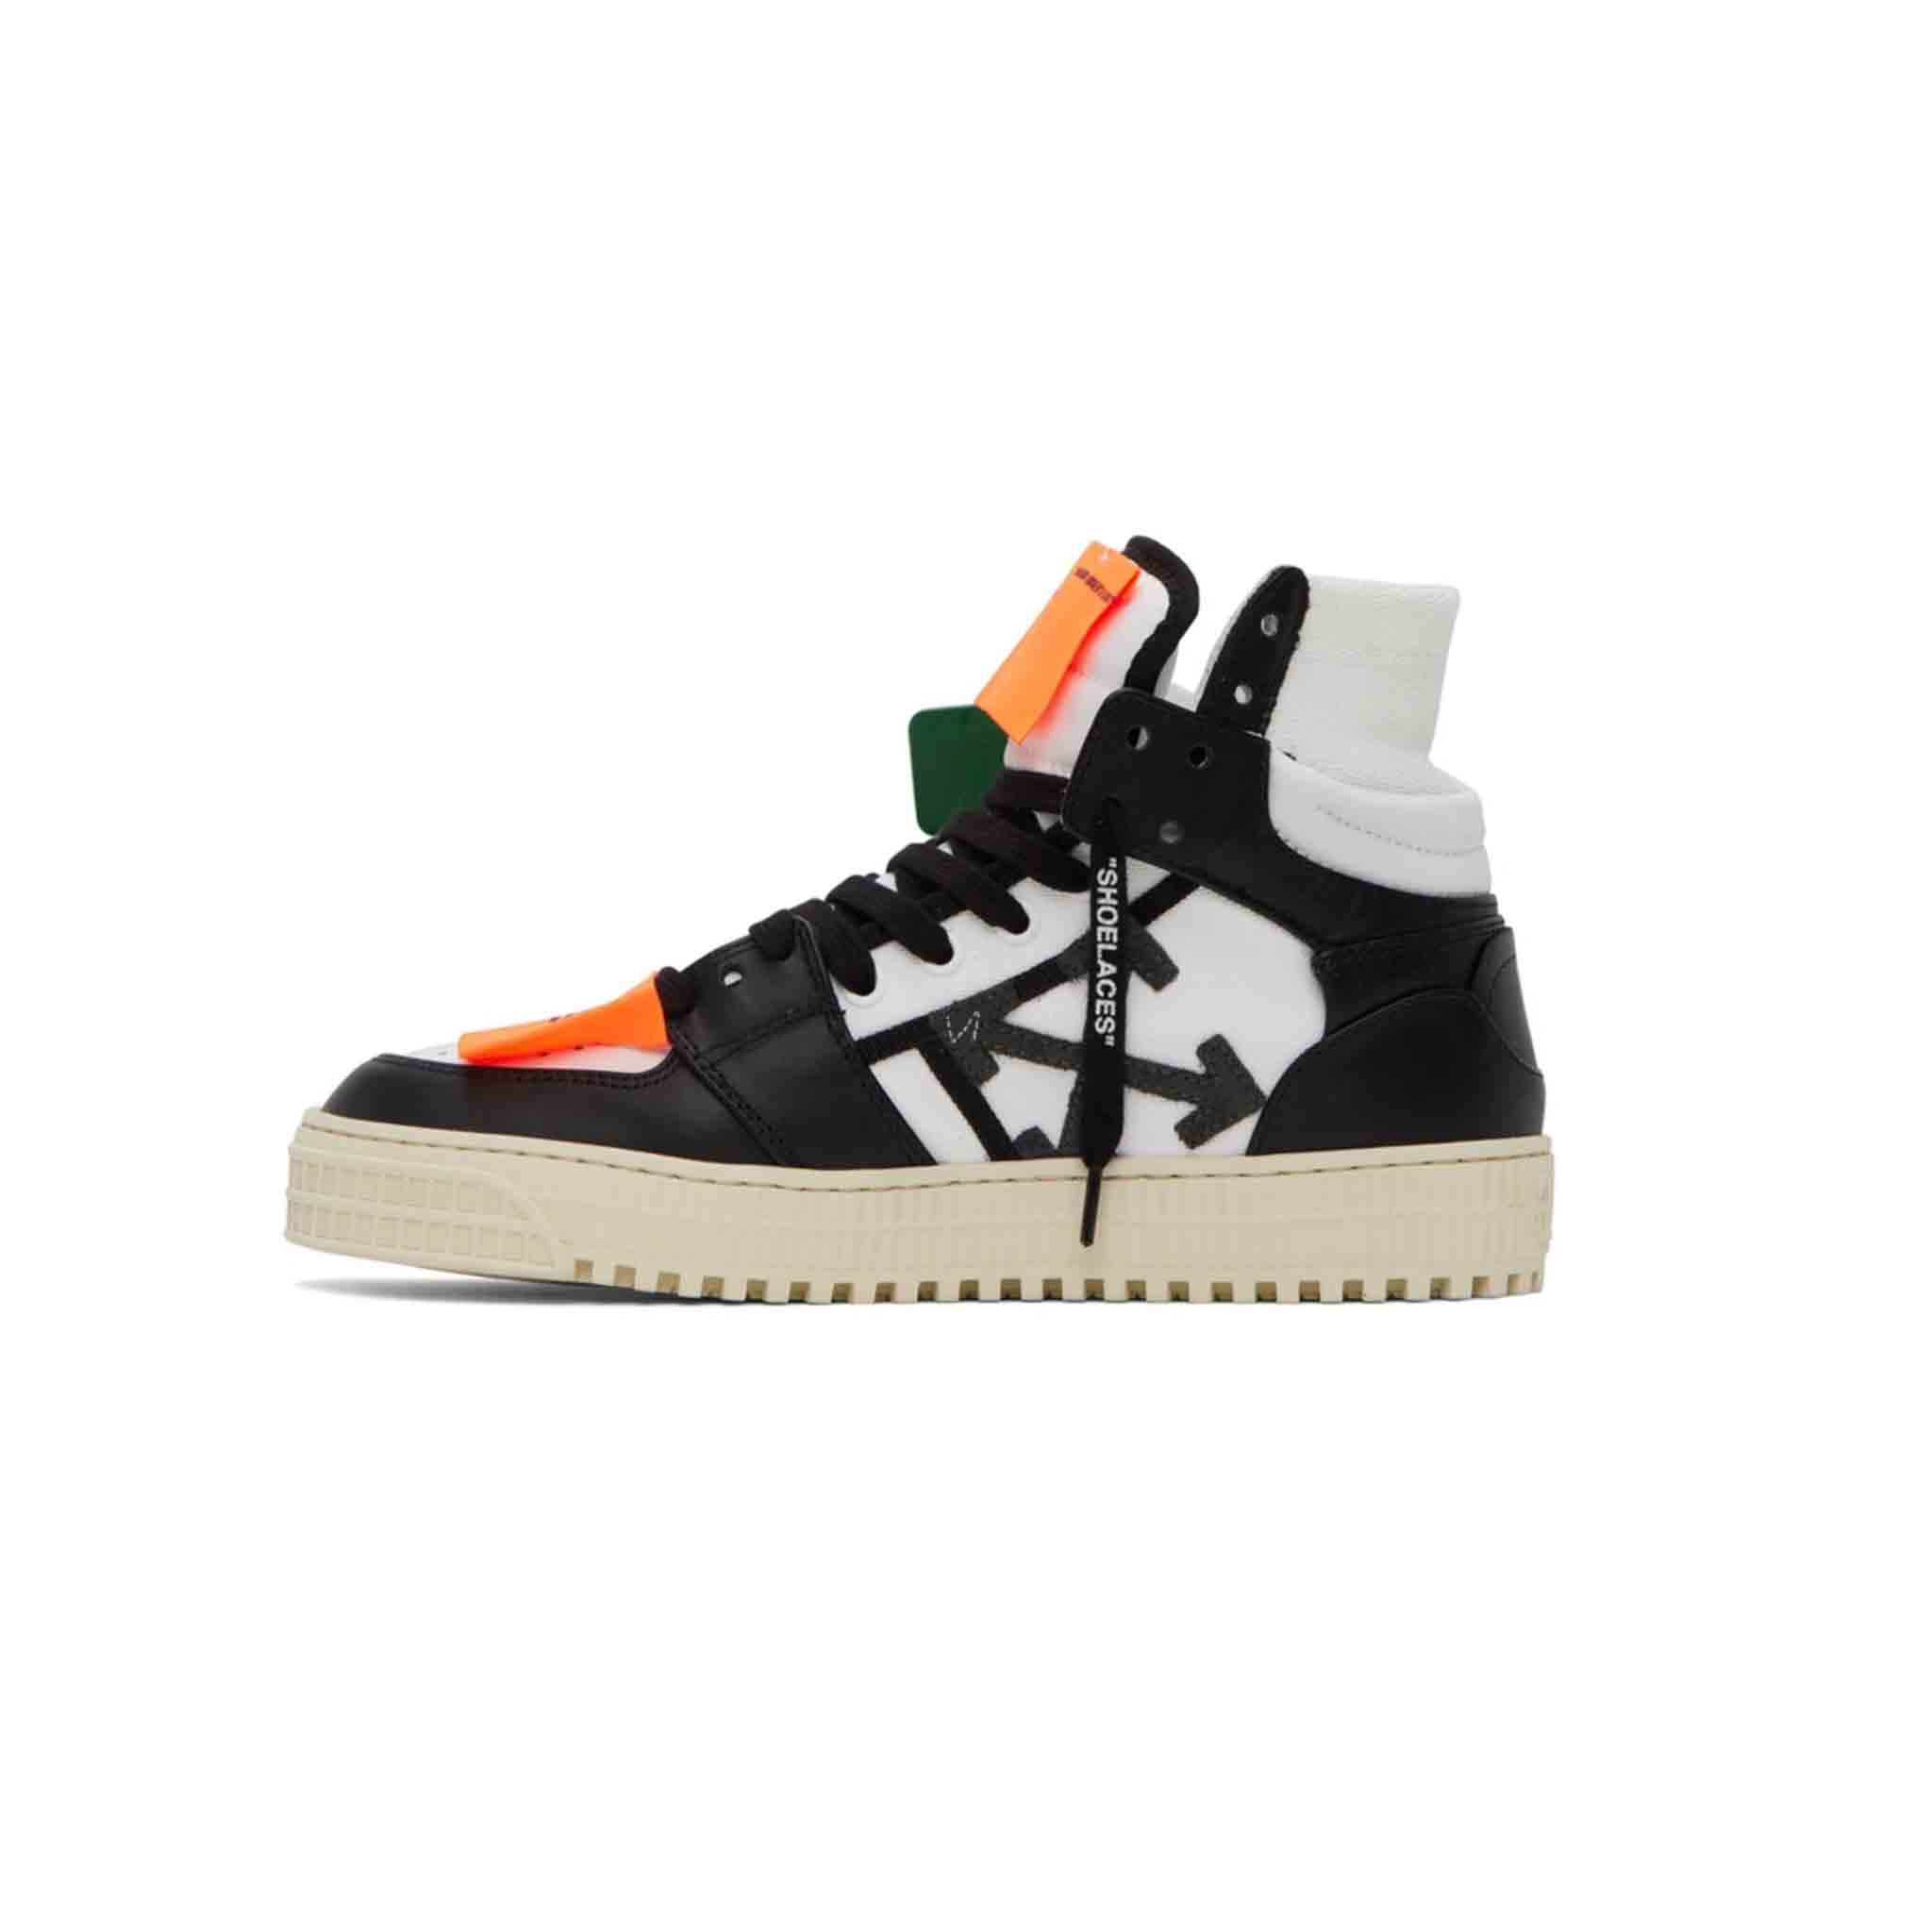 OFF-WHITE 3.0 Court Leather in Black/White